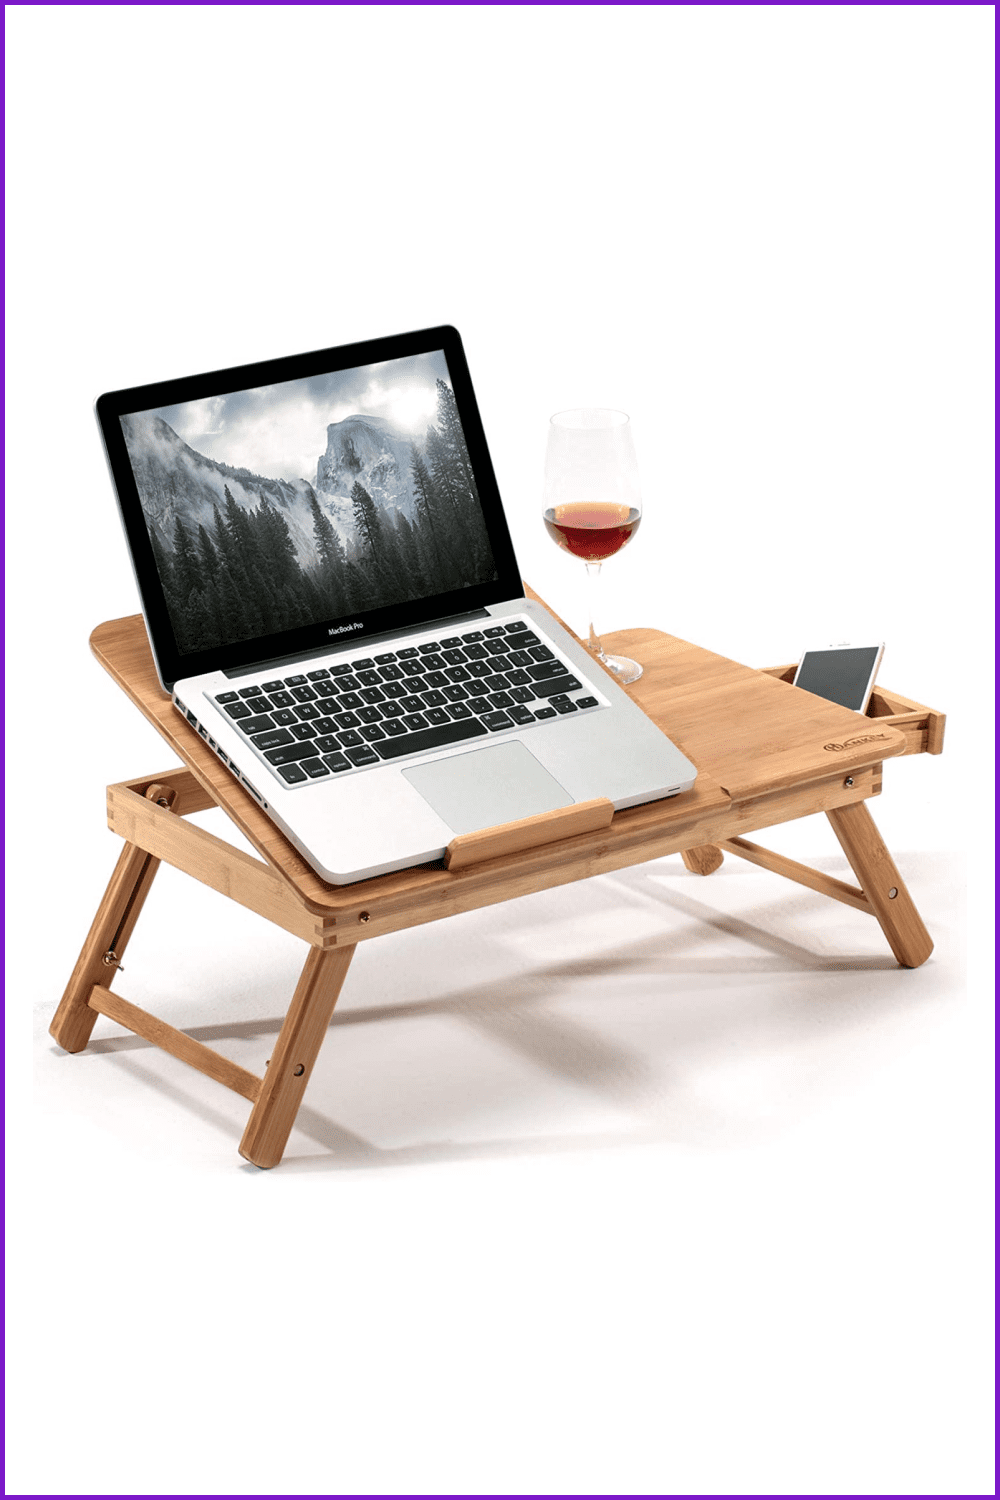 Wooden stand-table with a laptop on it.